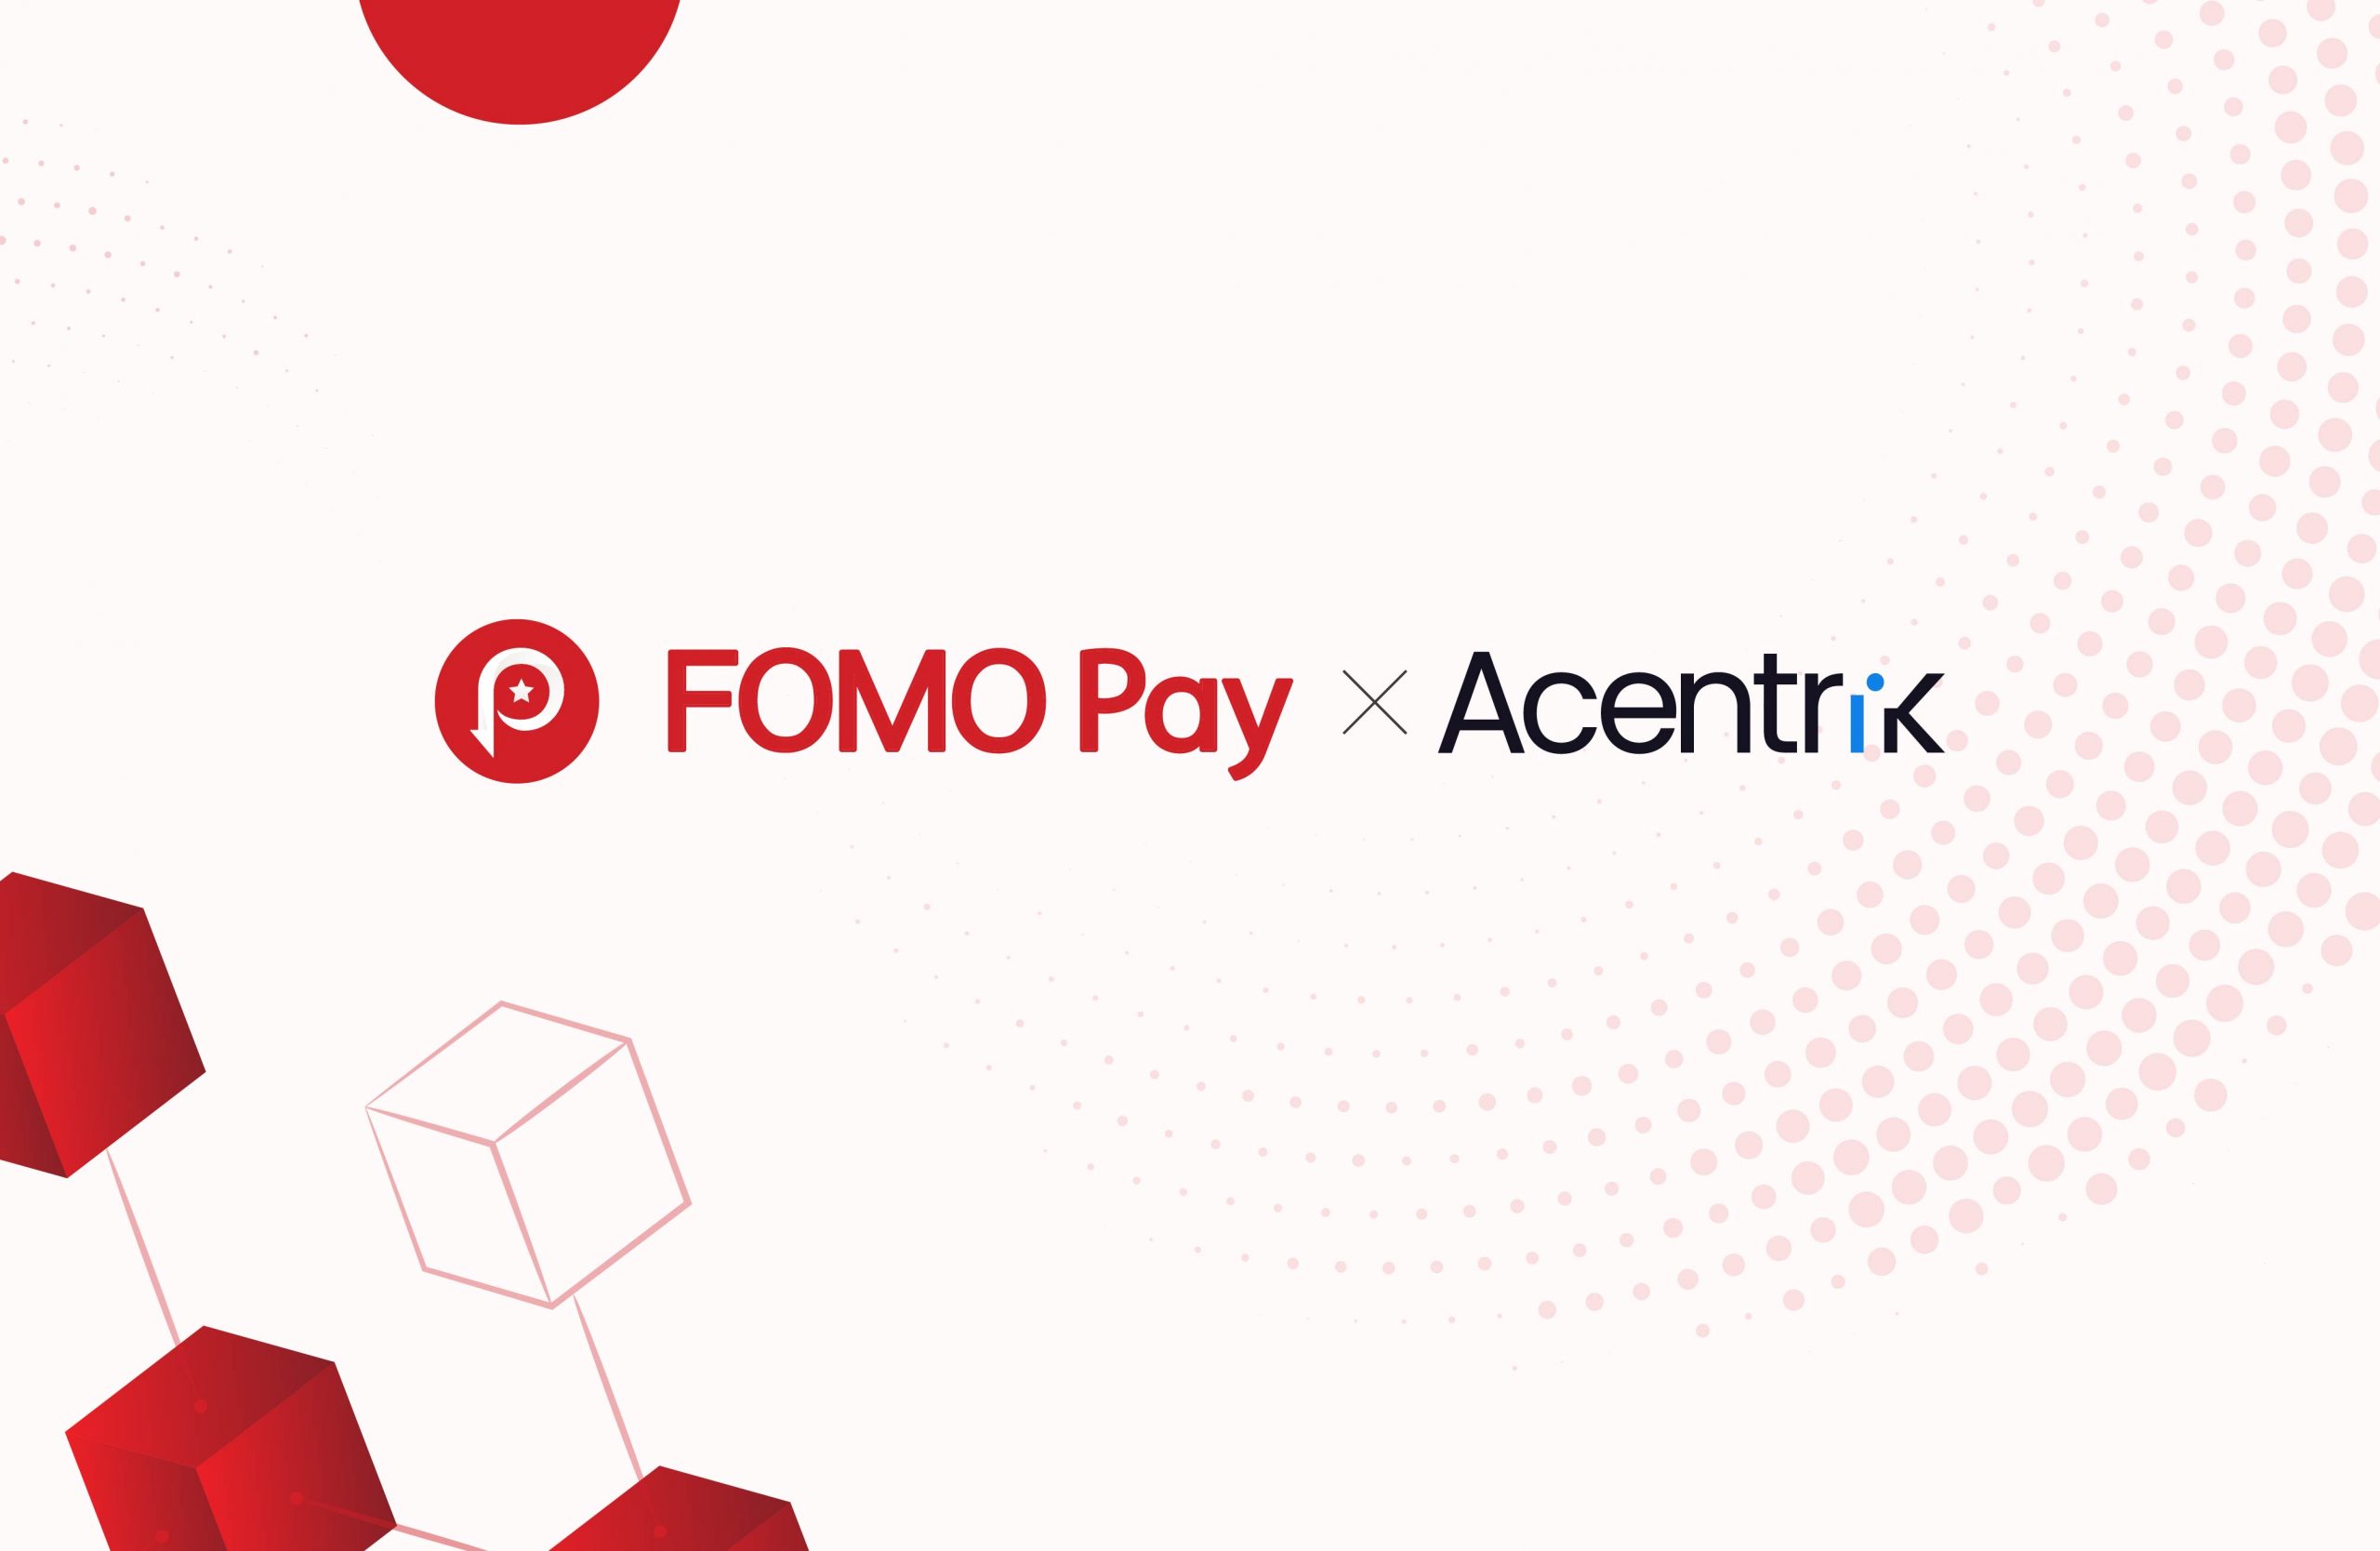 FOMO Pay partners with Acentrik to offer an on-ramp/off-ramp payment solution for B2B data marketplace